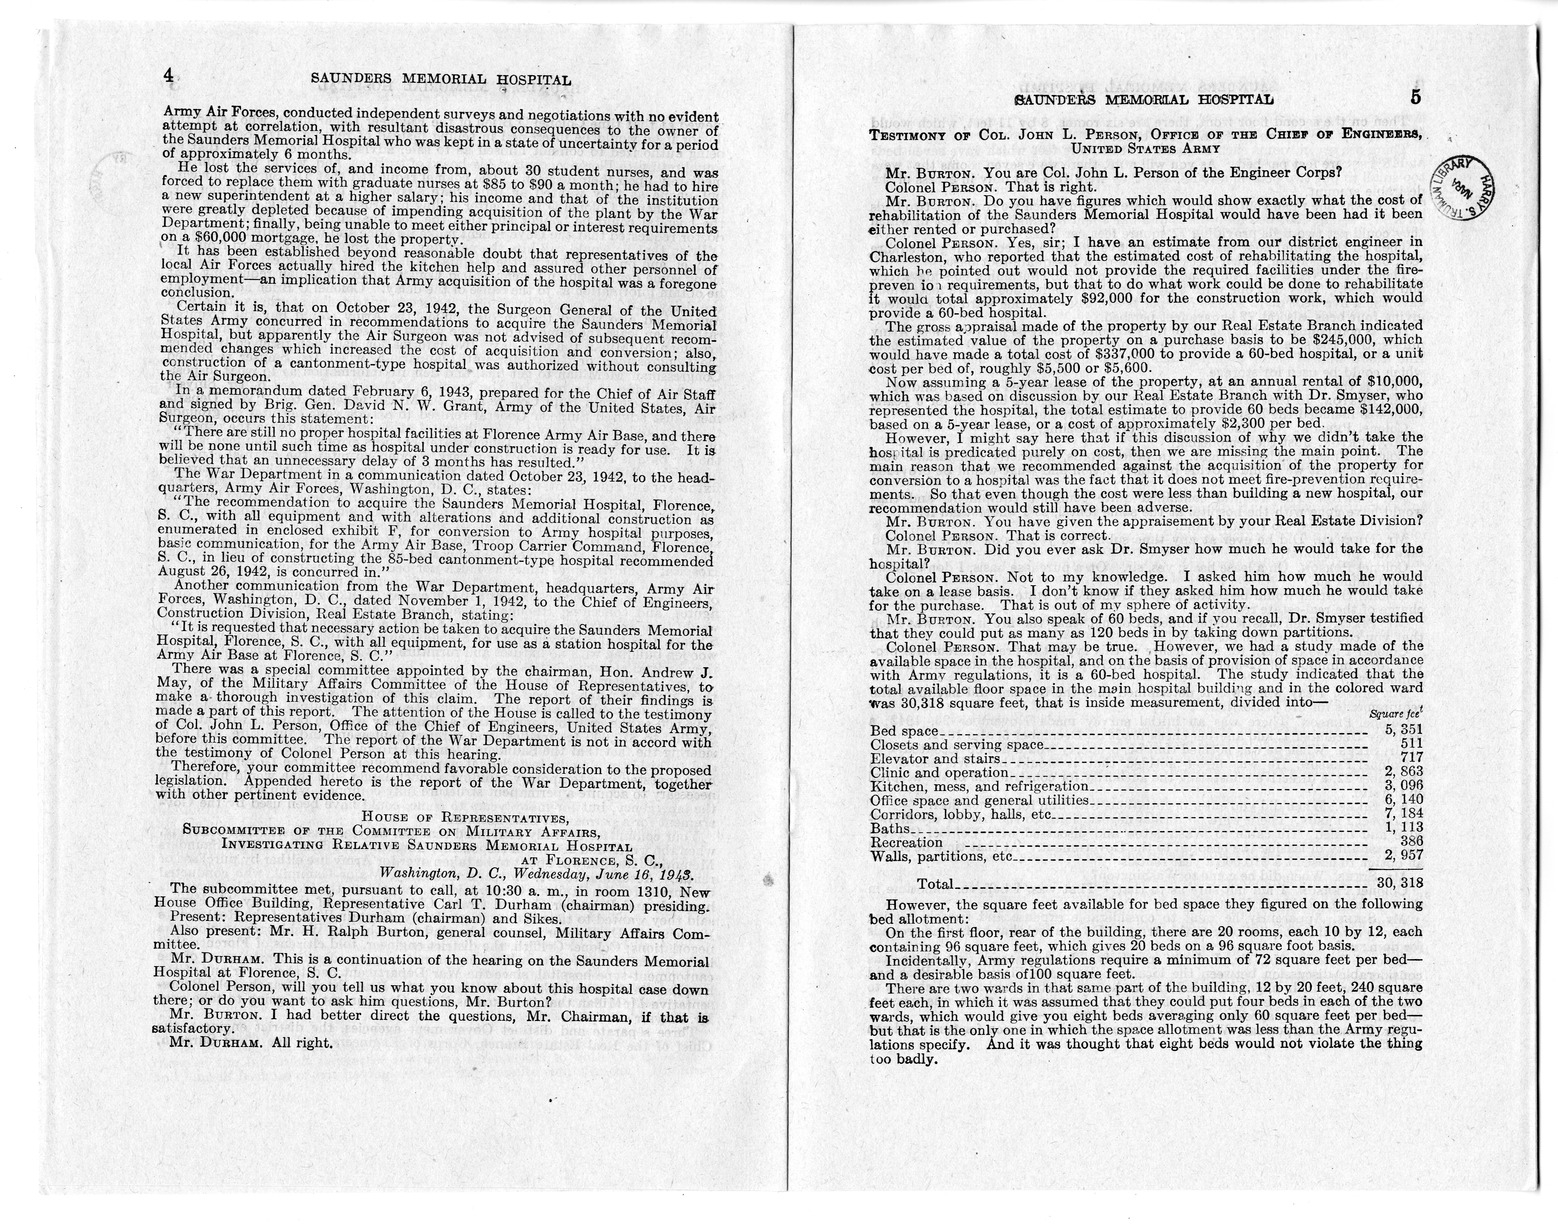 Memorandum from Harold D. Smith to M. C. Latta, H. R. 1793, To Confer Jurisdiction Upon the United States District Court for the Eastern District of South Carolina to Hear, Determine, and Render Judgment Upon the Claim of the Board of Trustees of the Saunders Memorial Hospital, with Attachments